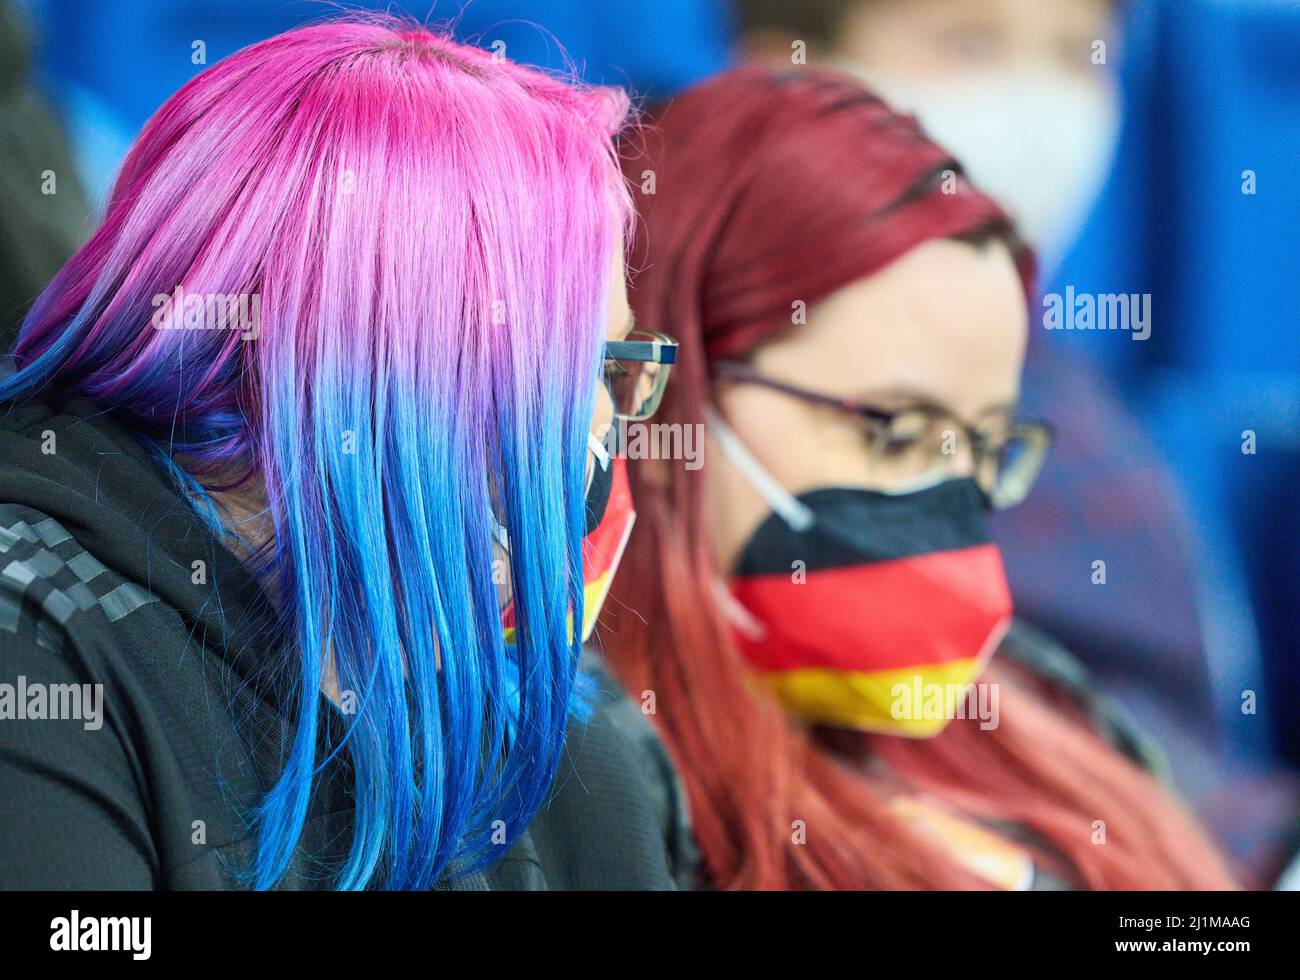 DFB fans in the friendly match GERMANY - ISRAEL Preparation for World Championships 2022 in Qatar ,Season 2021/2022, on Mar 26, 2022  in Sinsheim, Germany.  © Peter Schatz / Alamy Live News Stock Photo